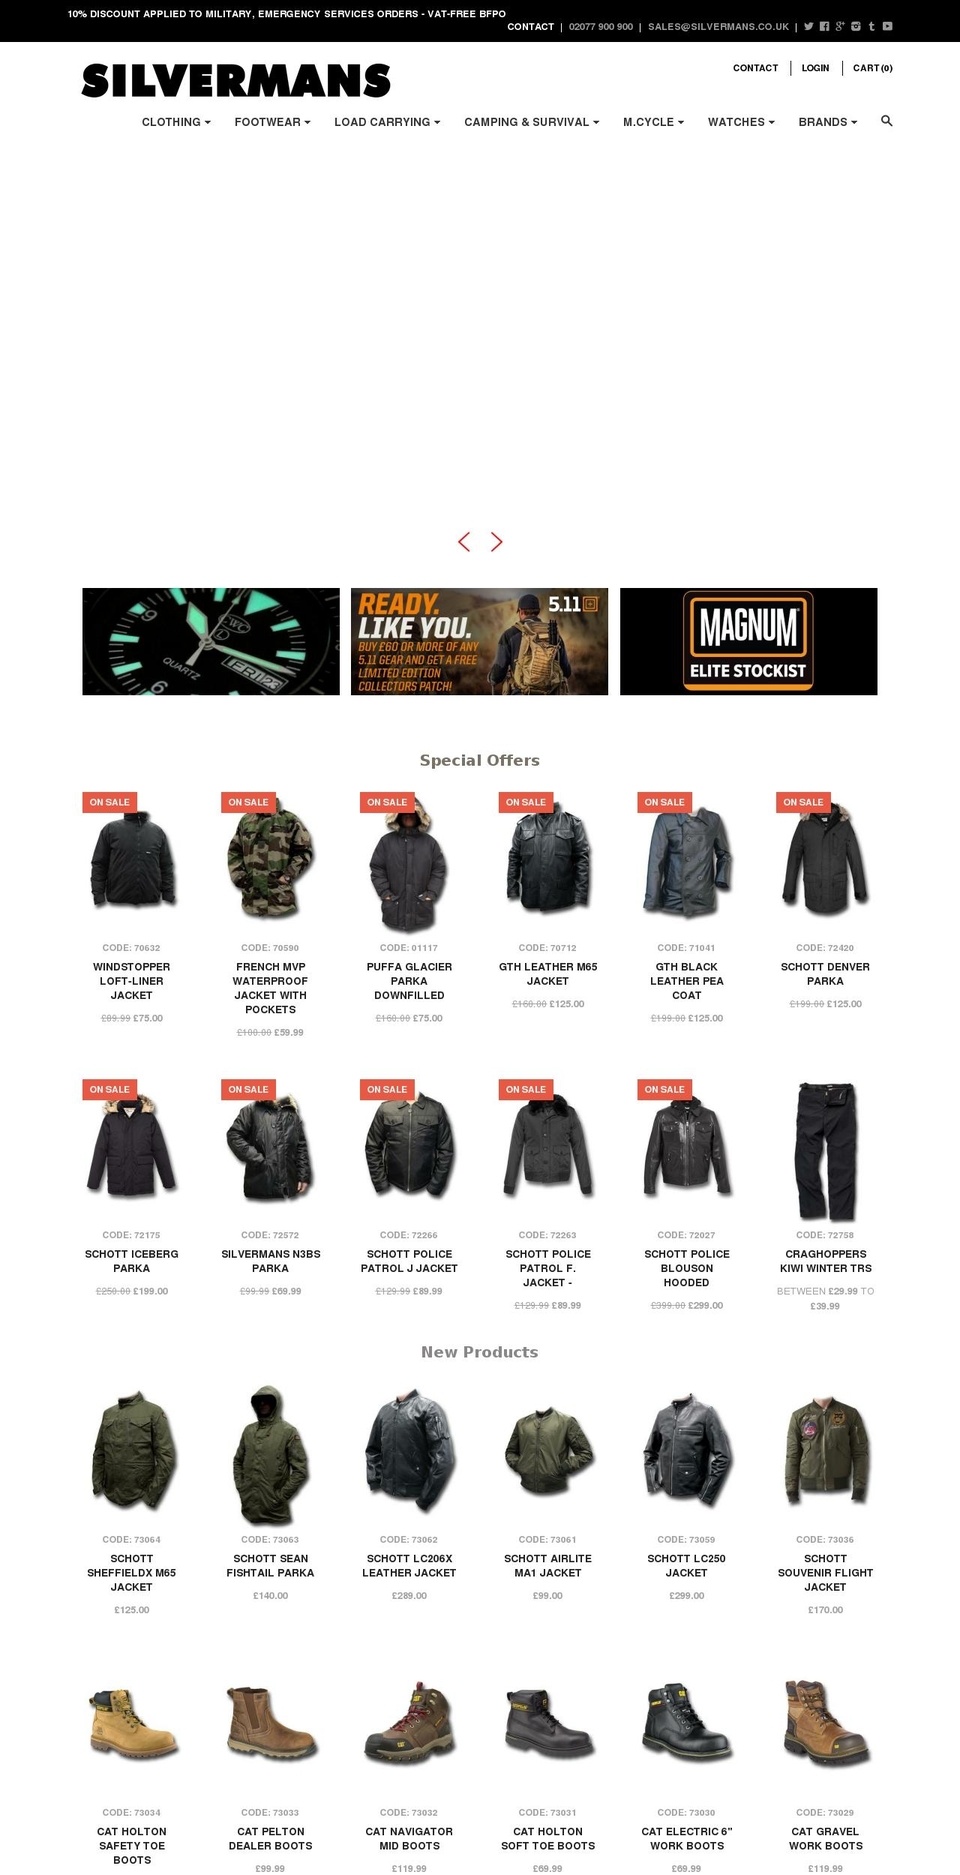 Focal Shopify theme site example silvermans.co.uk